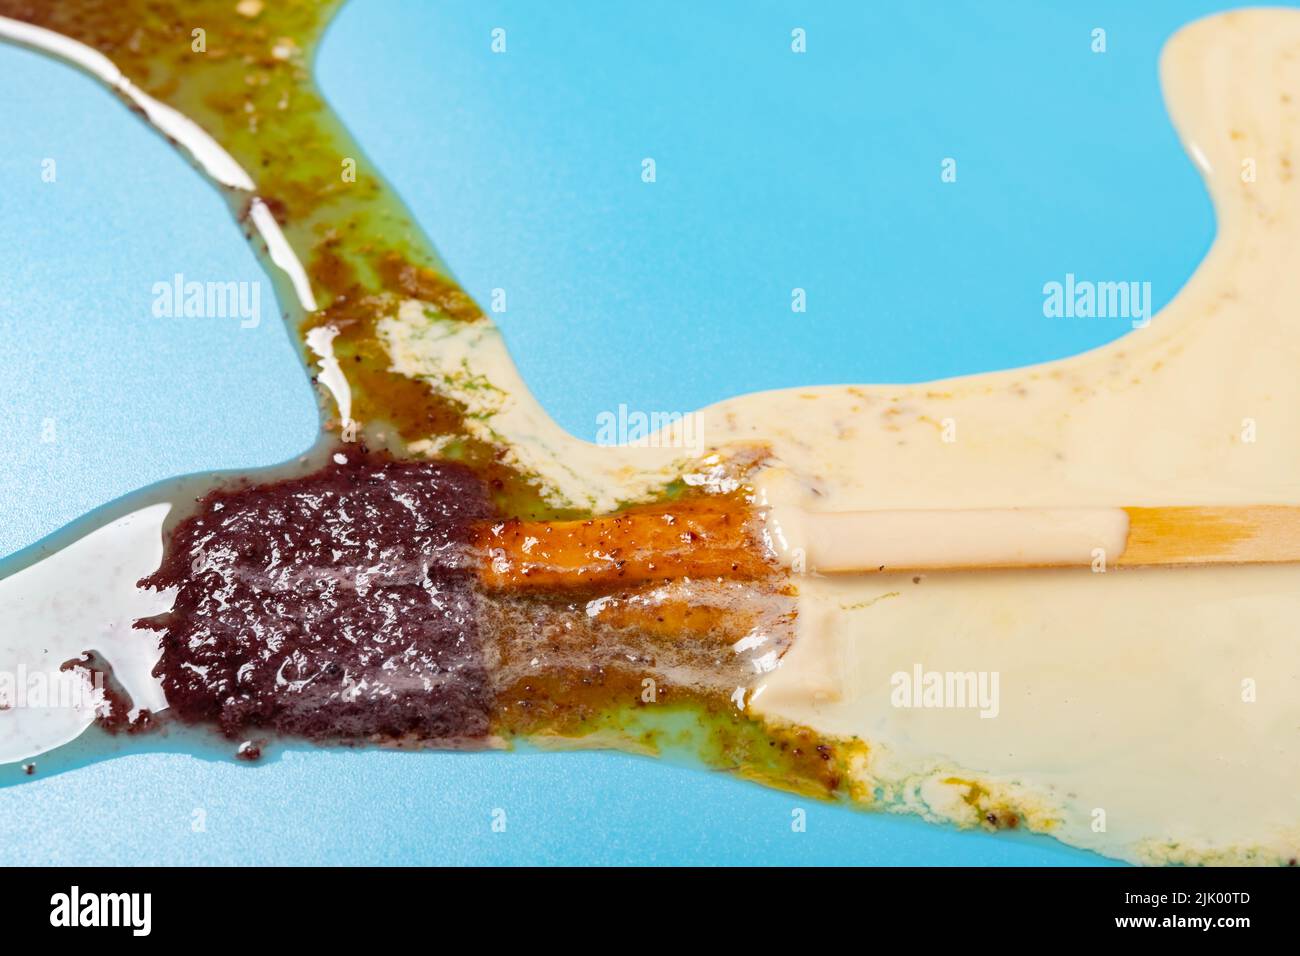 passion fruit and waxberry and milkshake flavor popsicle melted on blue background Stock Photo